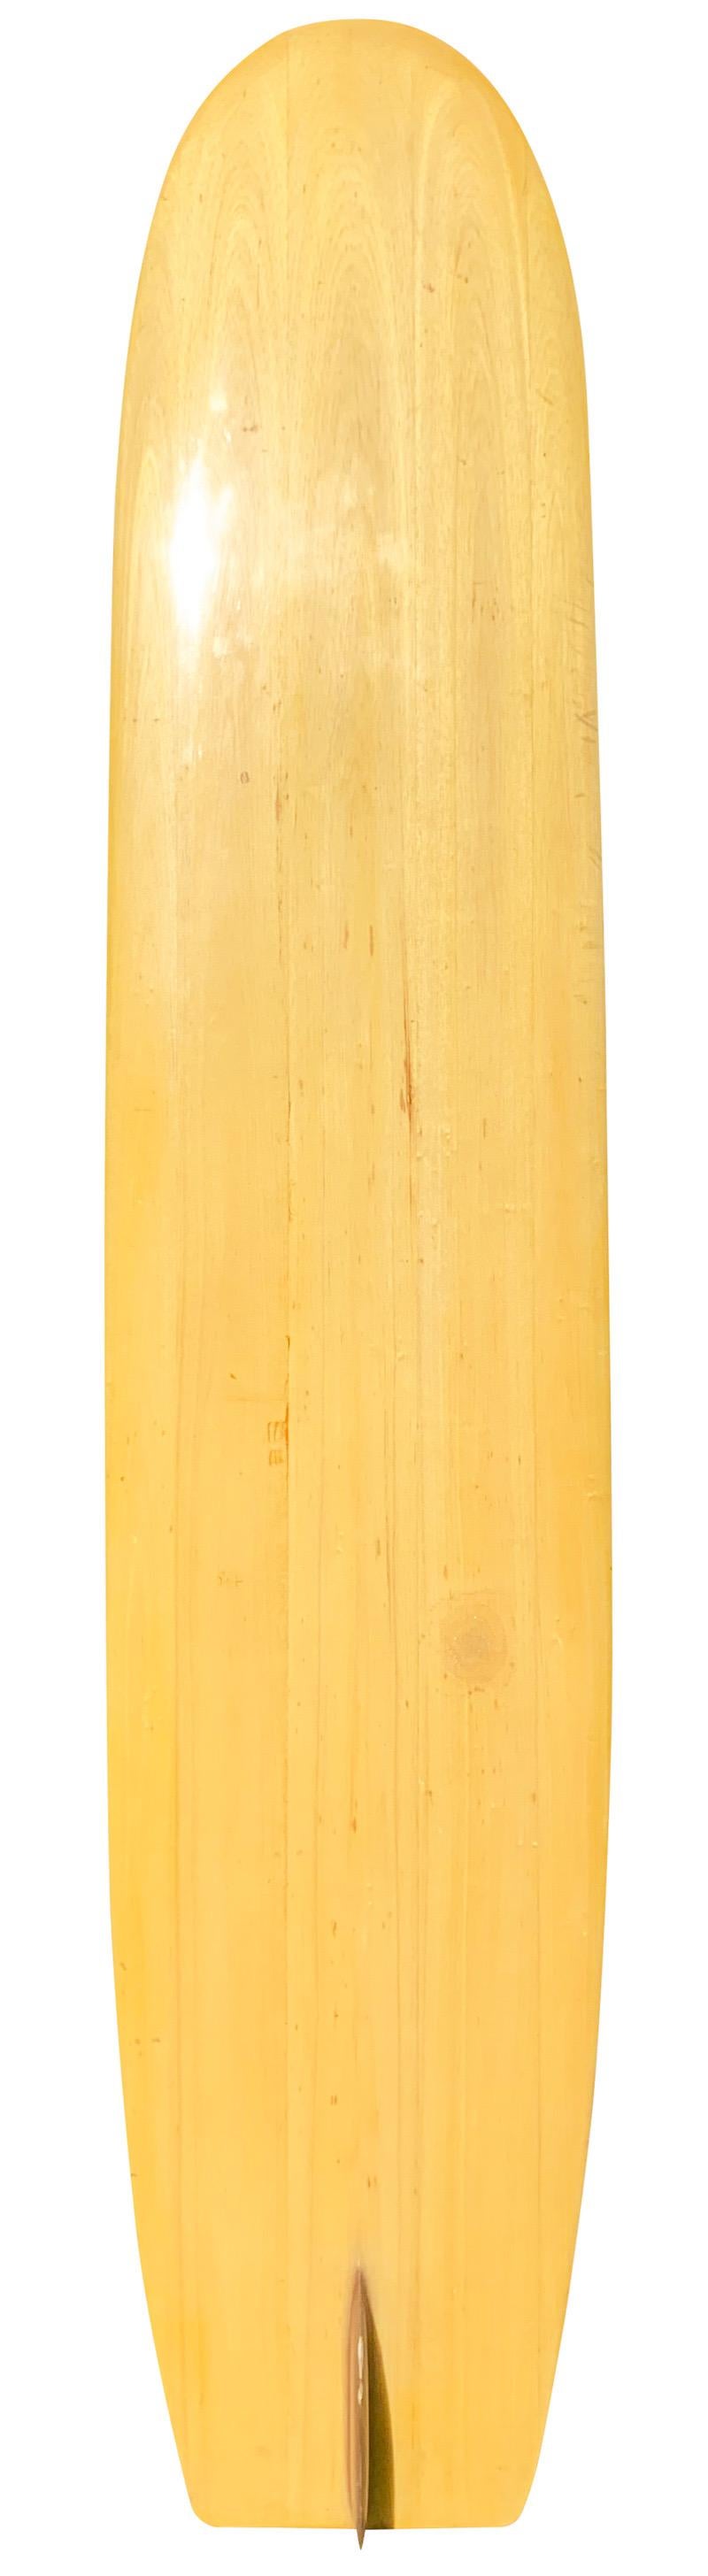 1950 Bob Simmons solid balsa wood longboard replica shaped in the 1990s. Made by former Yater Surfboards shaper Dan Highland. Features an early balsawood surfboard shape-design with early redwood single fin. Made using the 1950 Bob Simmons longboard